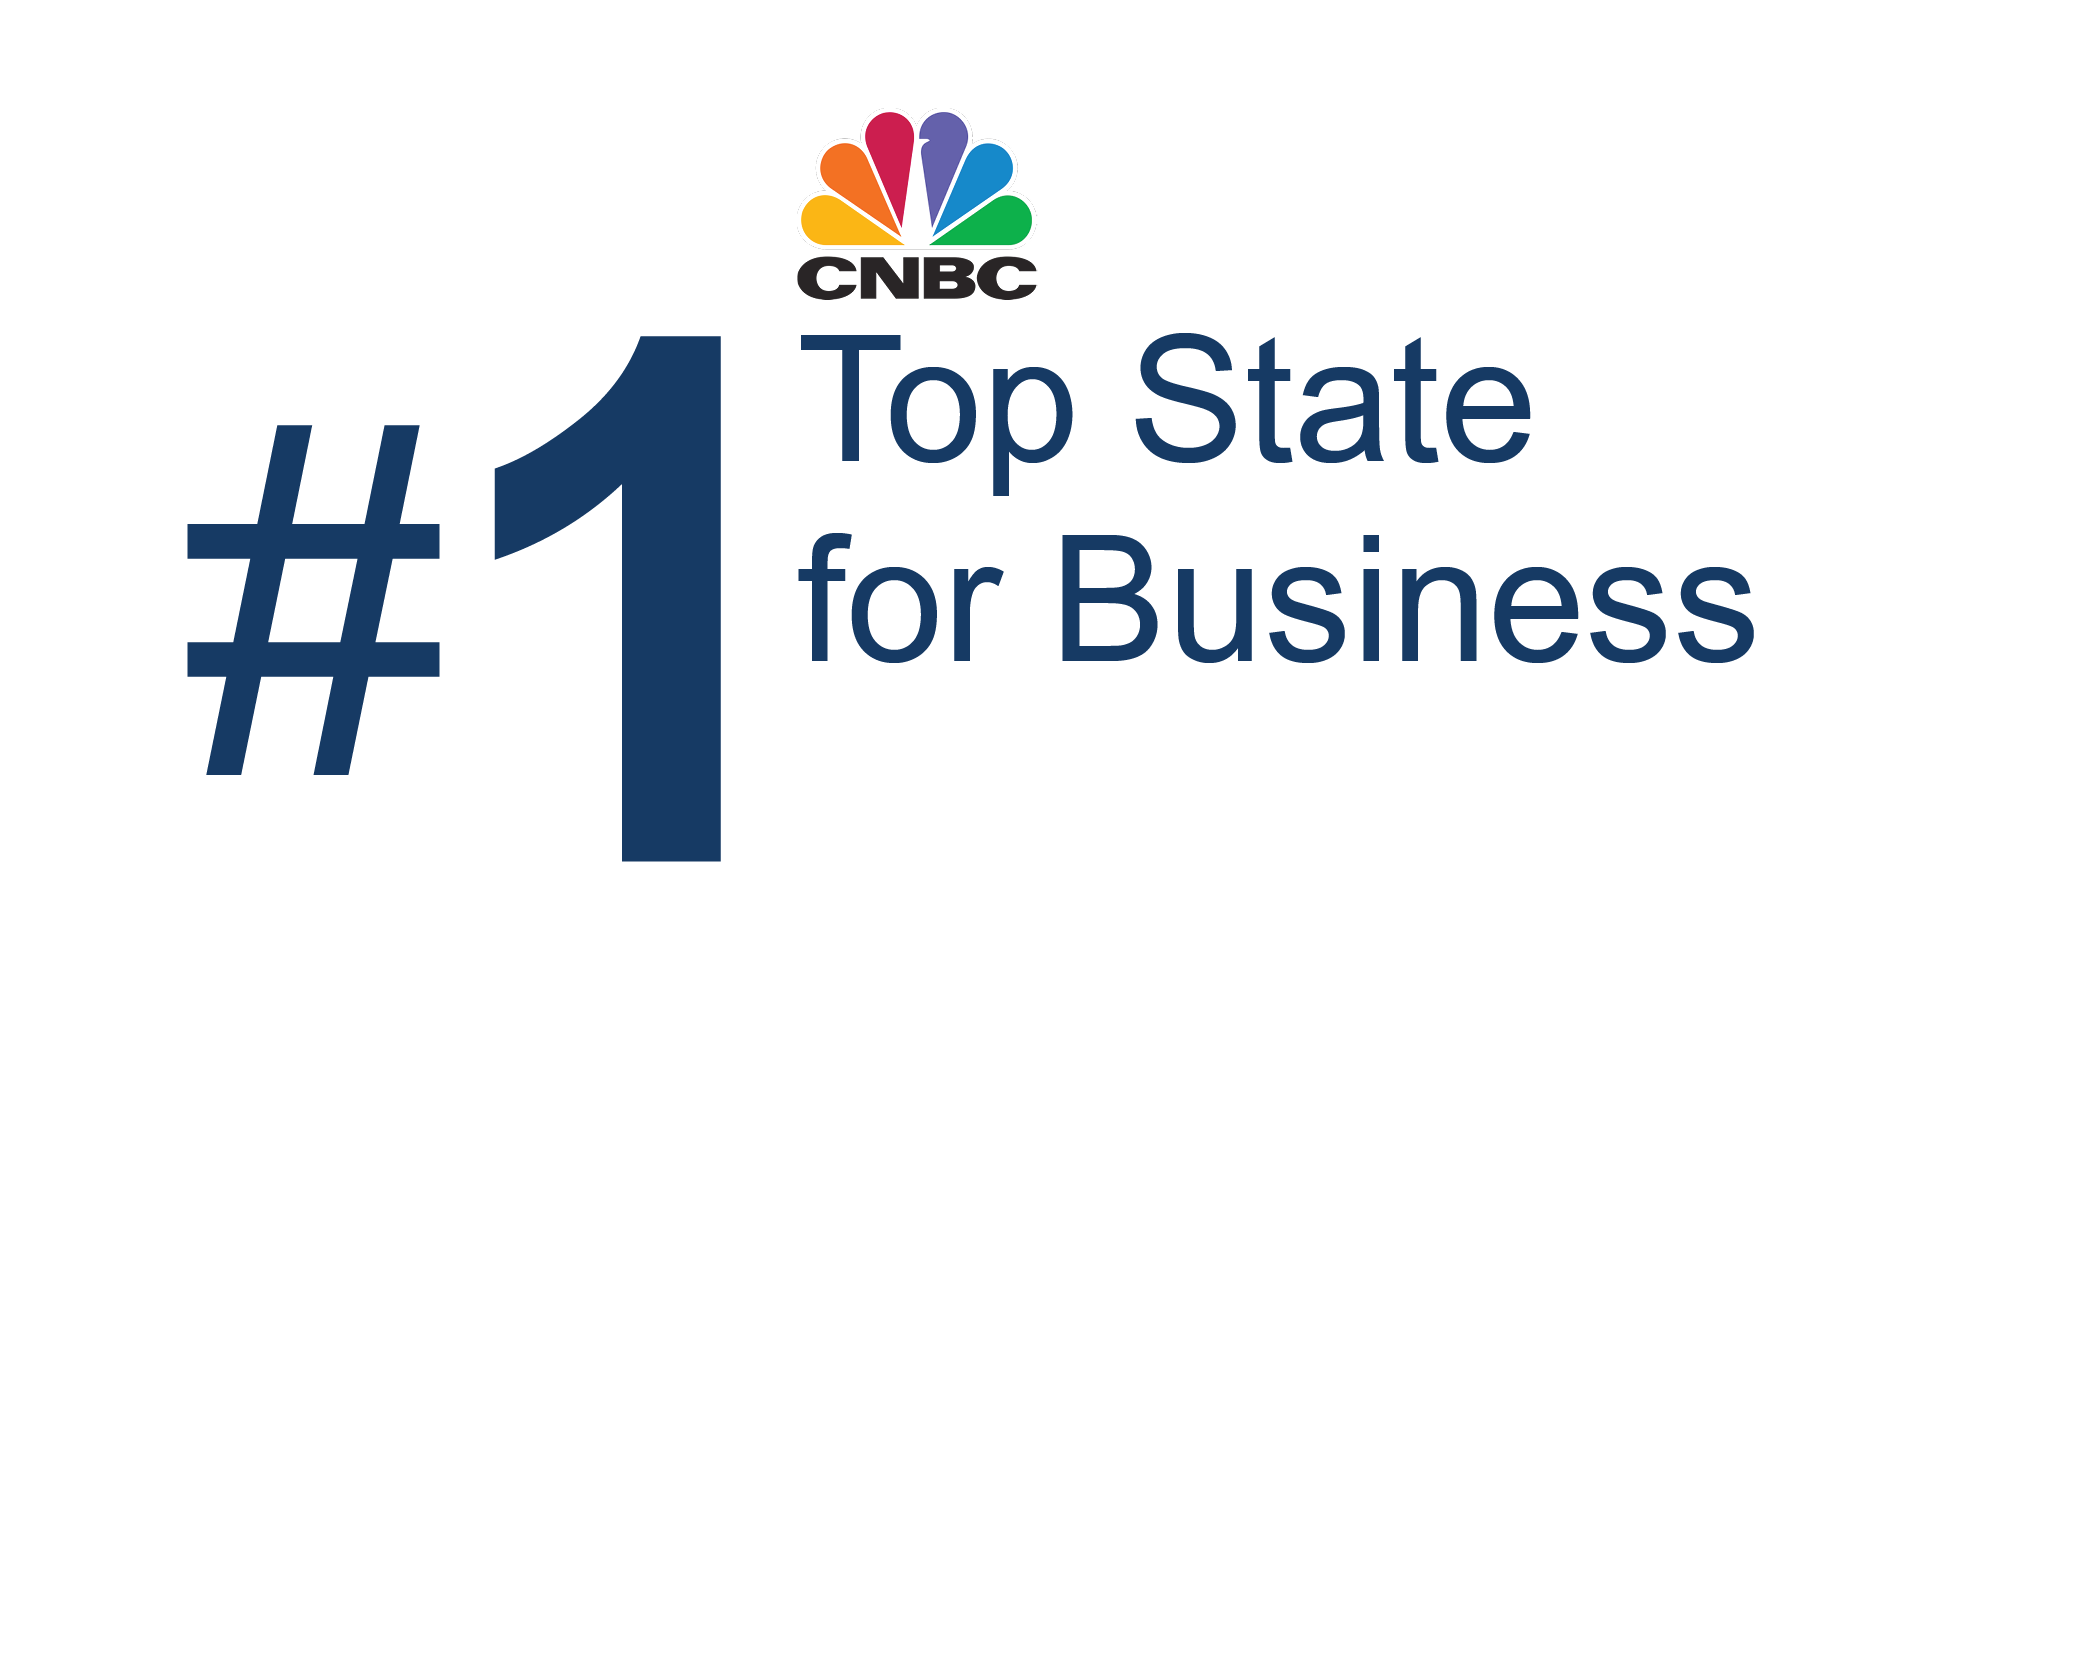 CNBC Top State for Business